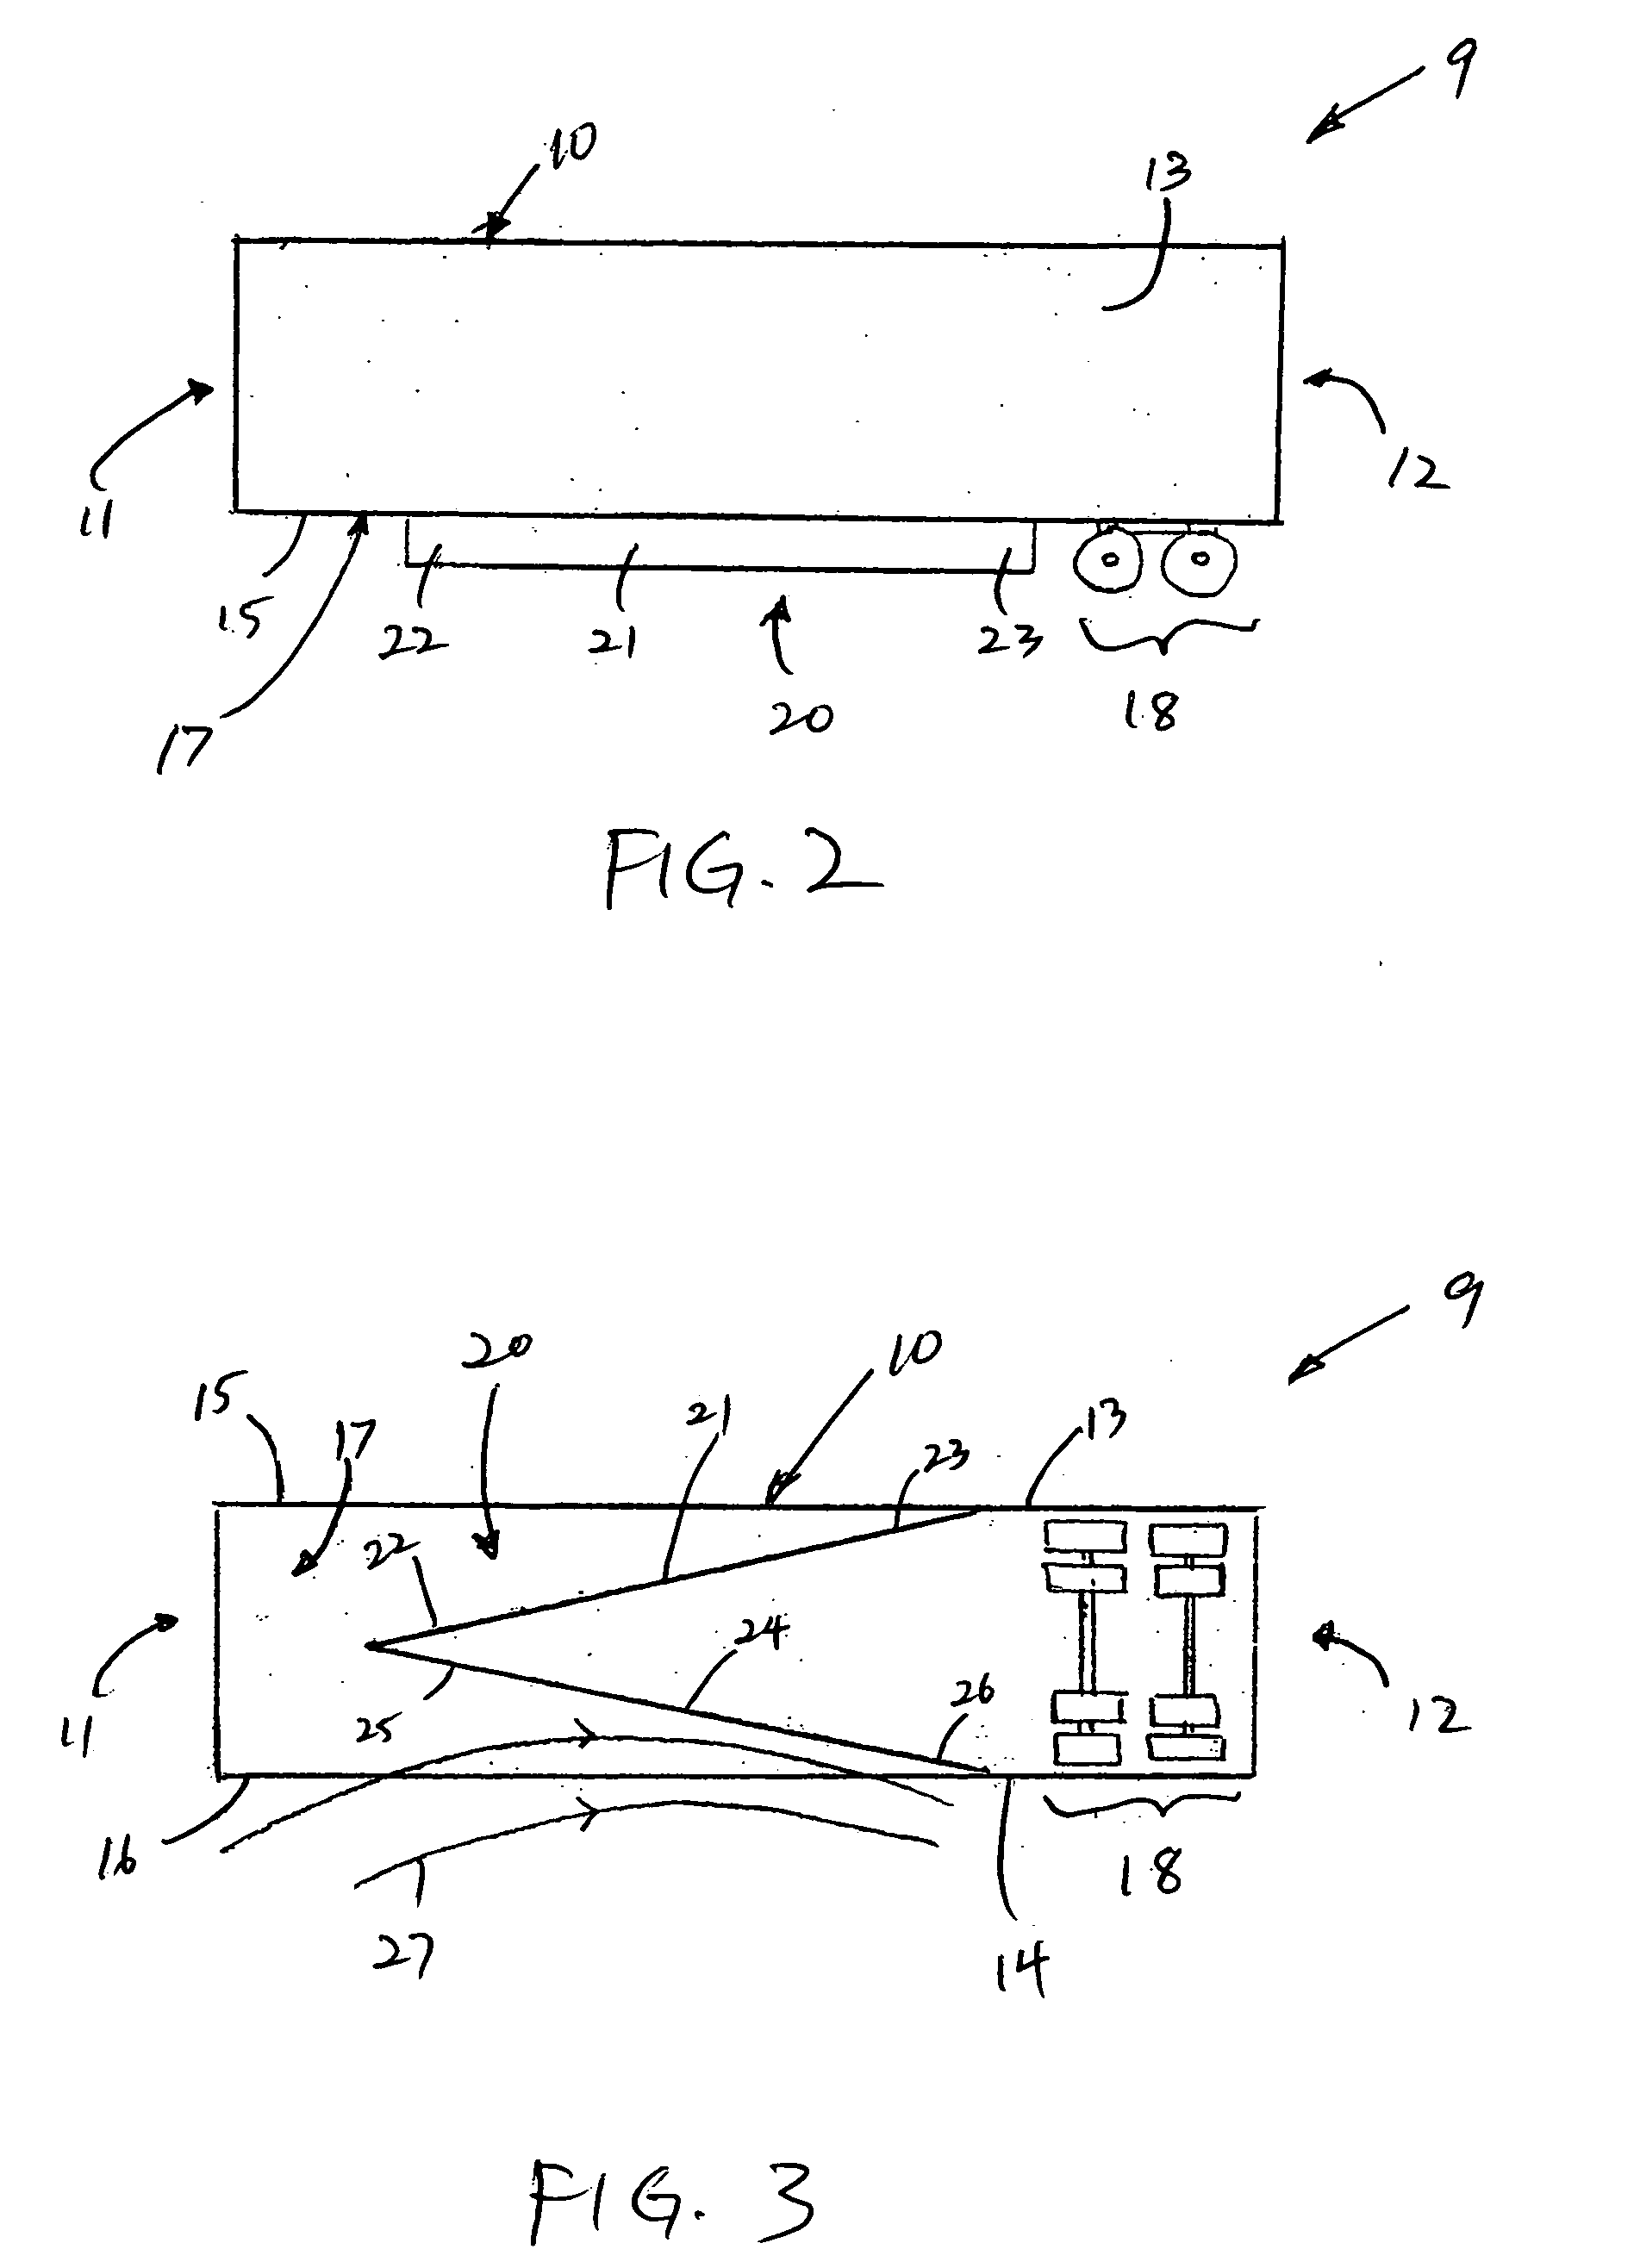 Aerodynamic drag reduction apparatus for wheeled vehicles in ground effect